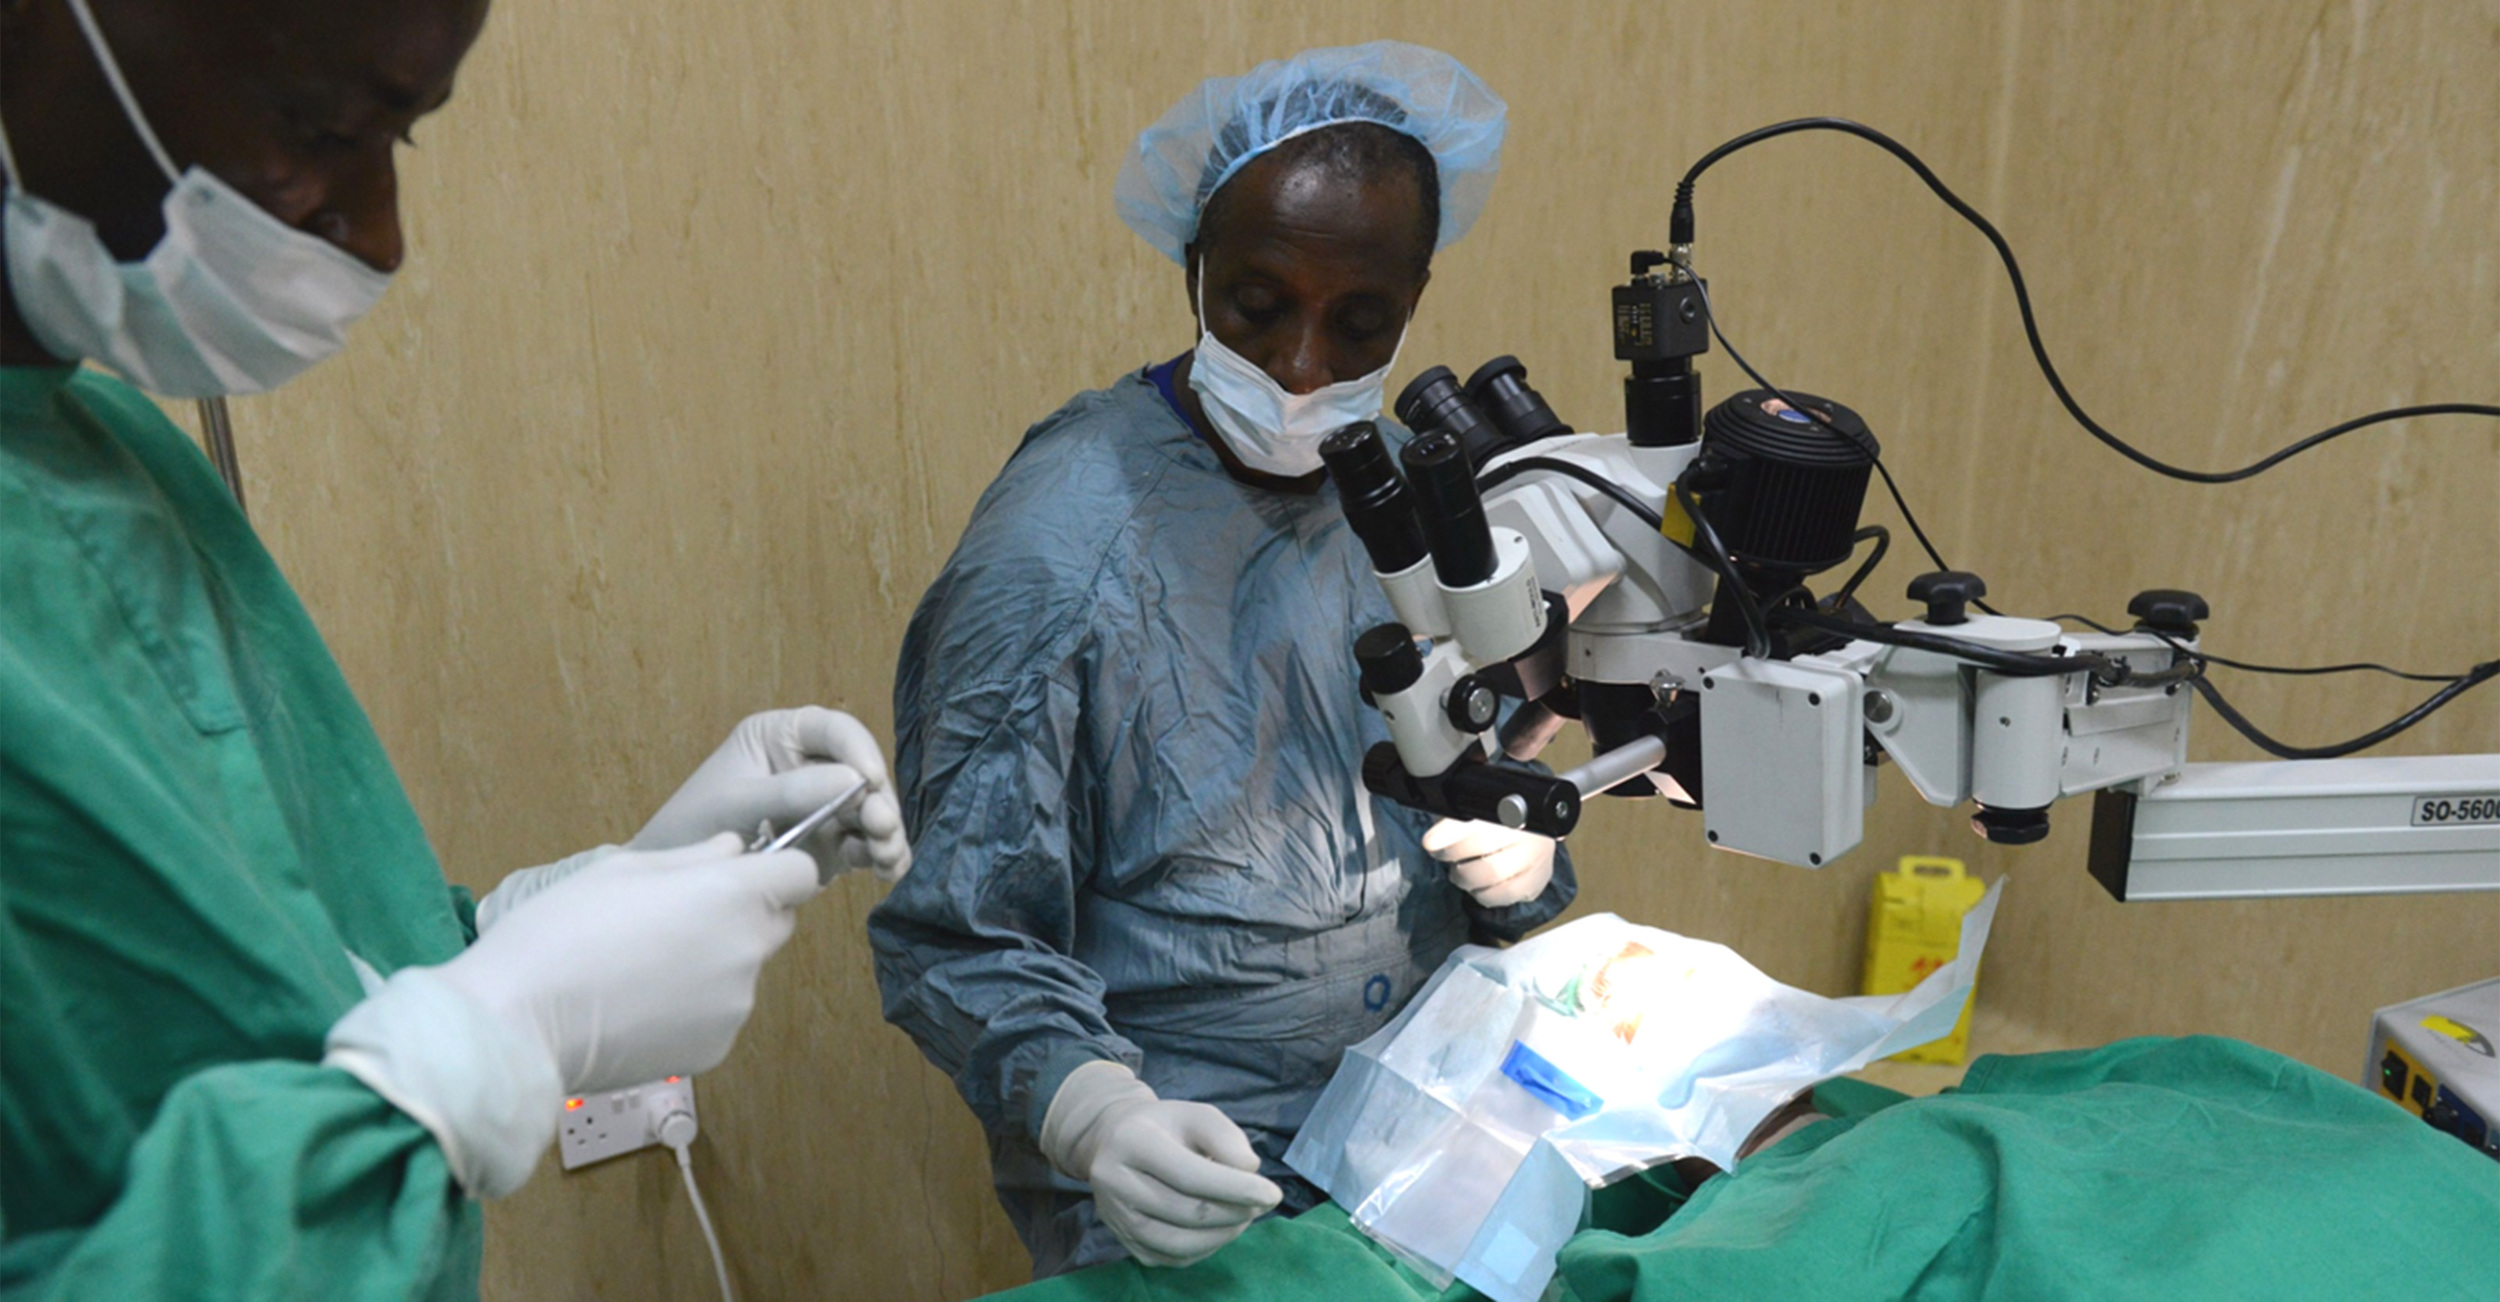   Skilled surgeons can treat dozens     of people with cataracts per day - and the operation is straightforward enough that other health staff can be trained to perform it.  